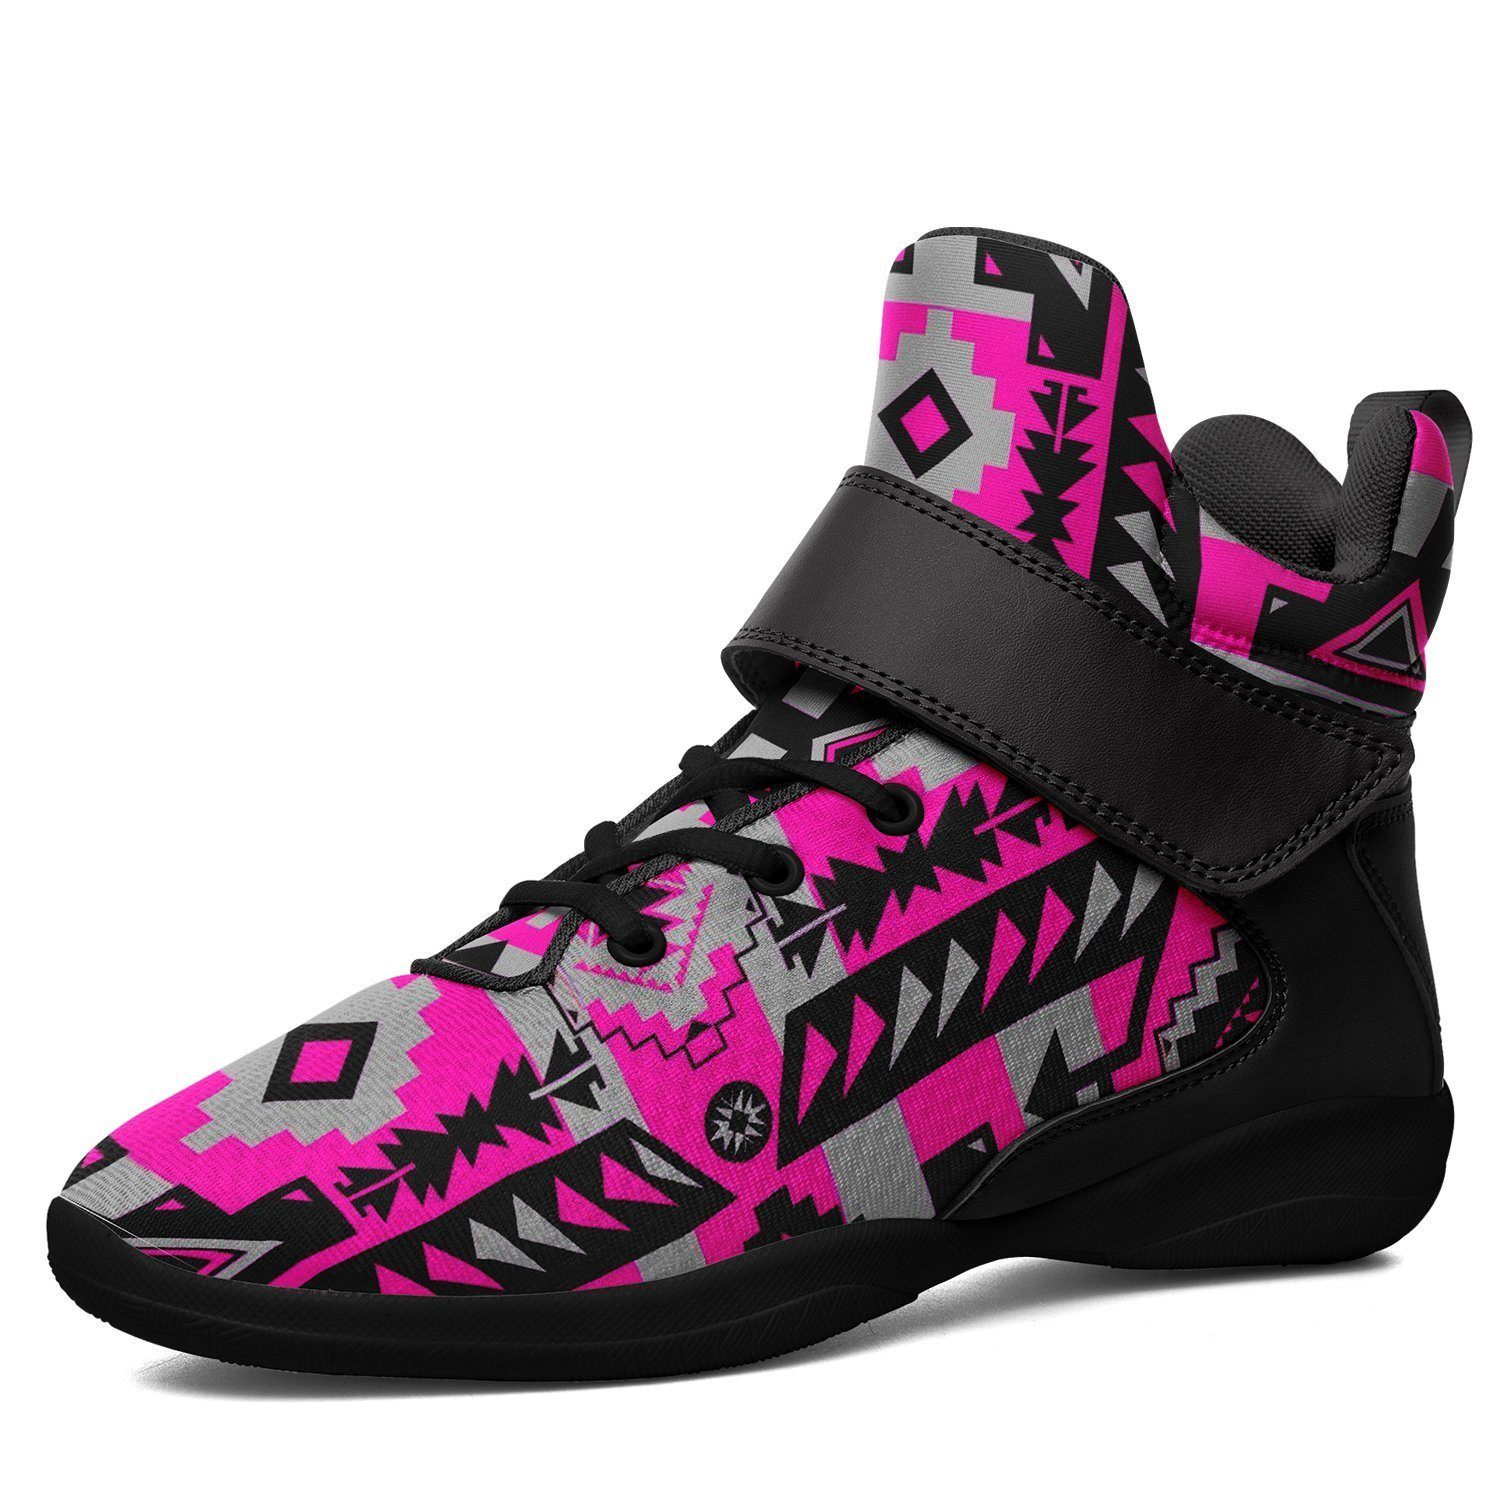 Chiefs Mountain Sunset Ipottaa Basketball / Sport High Top Shoes - Black Sole 49 Dzine US Men 7 / EUR 40 Black Sole with Black Strap 